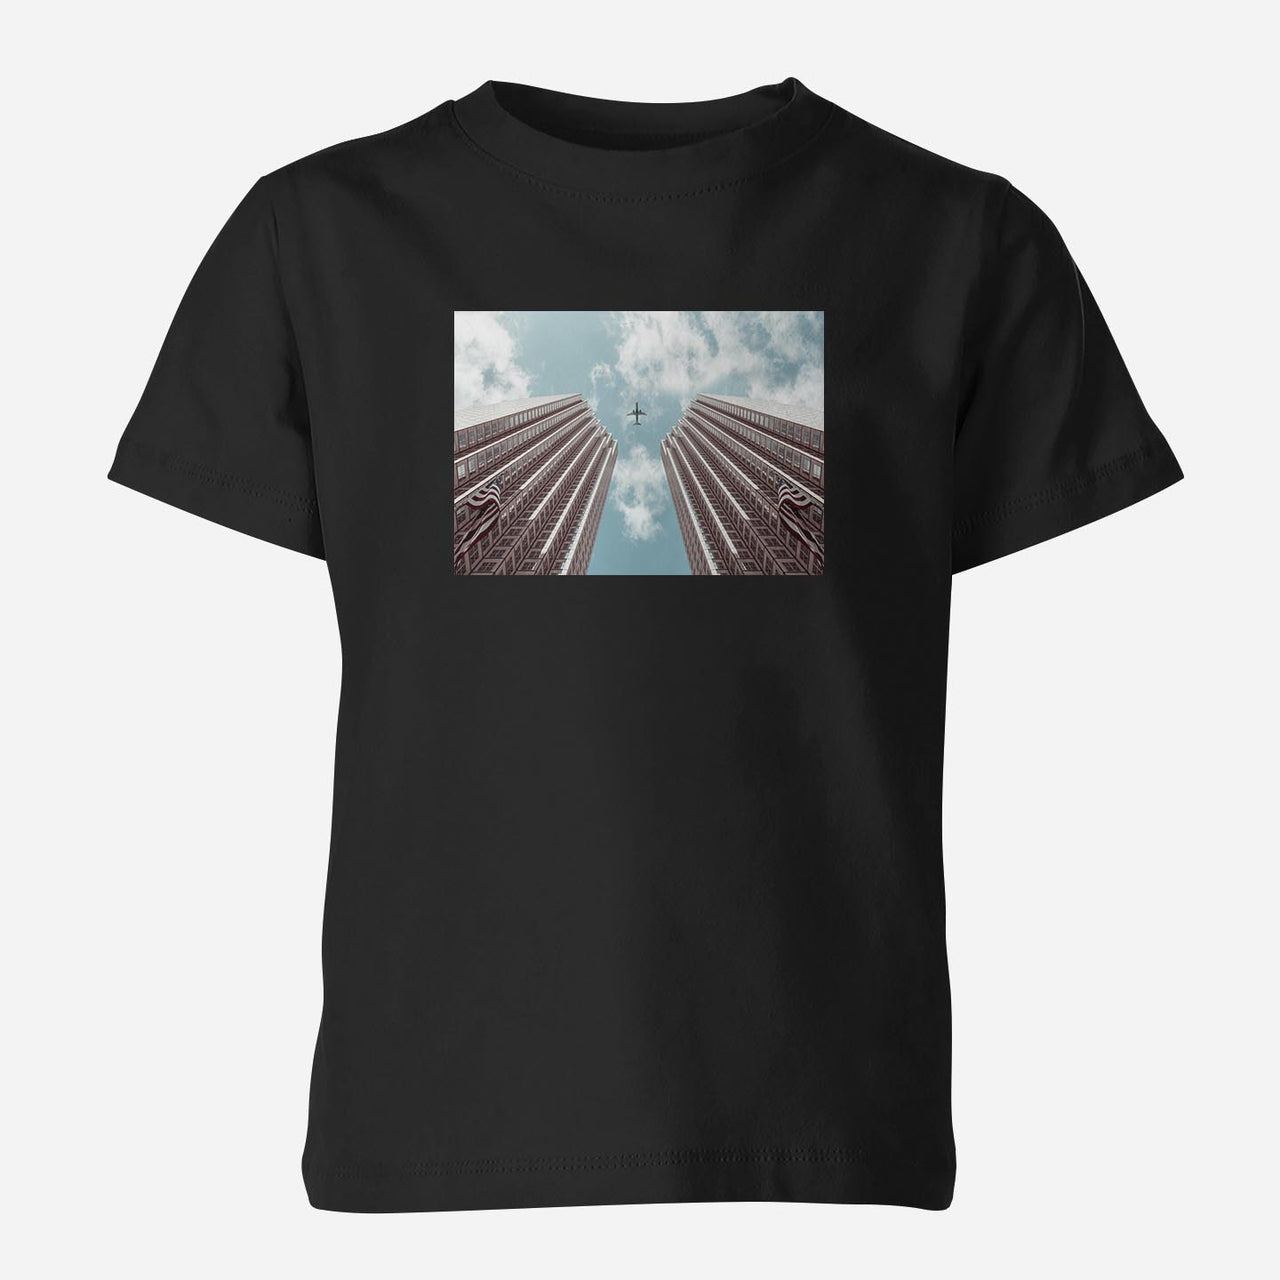 Airplane Flying over Big Buildings Designed Children T-Shirts